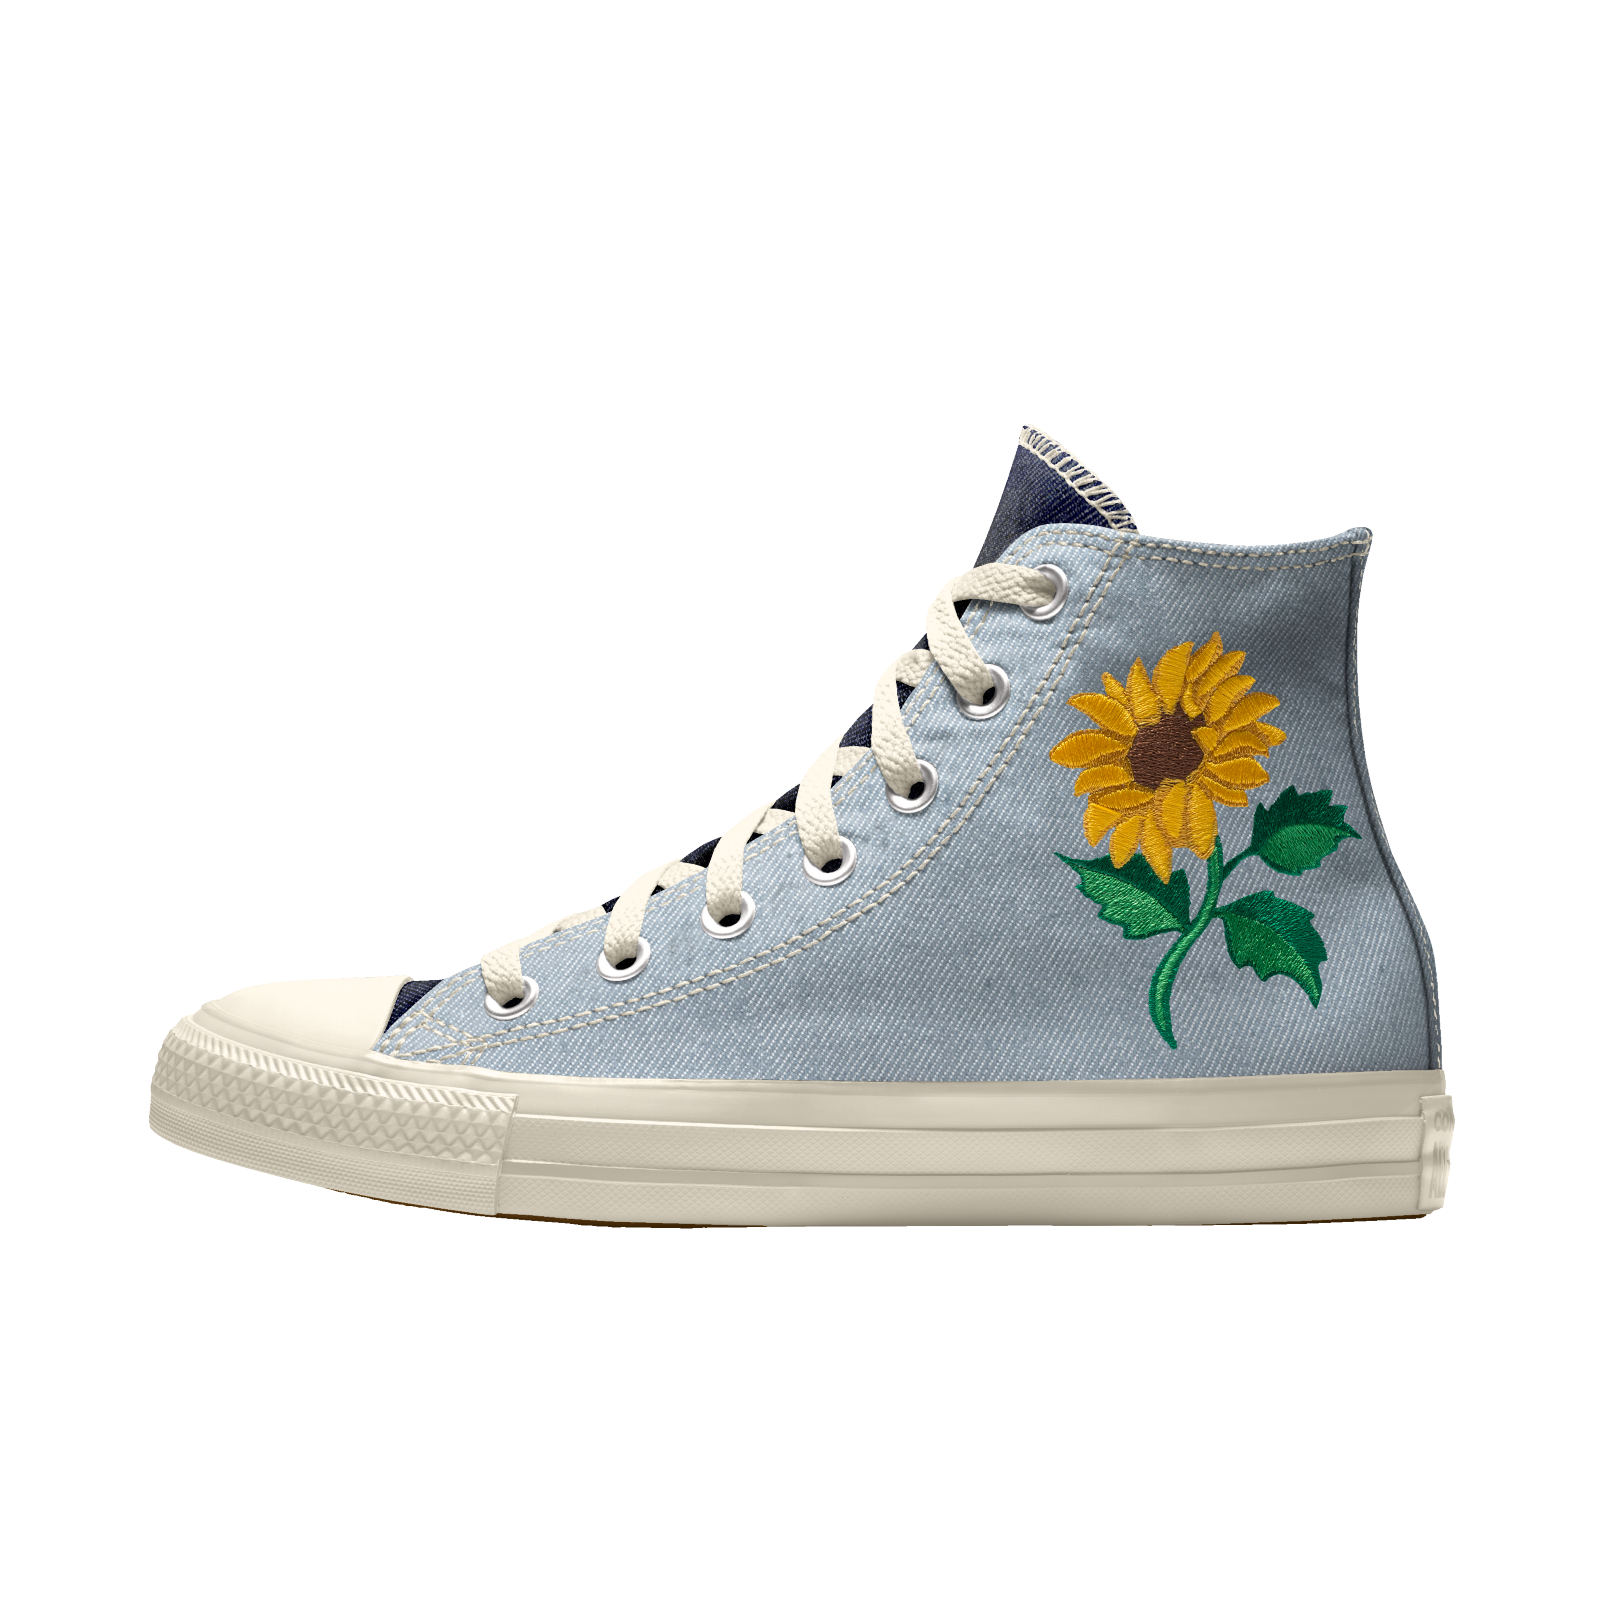 sunflower embroidered converse